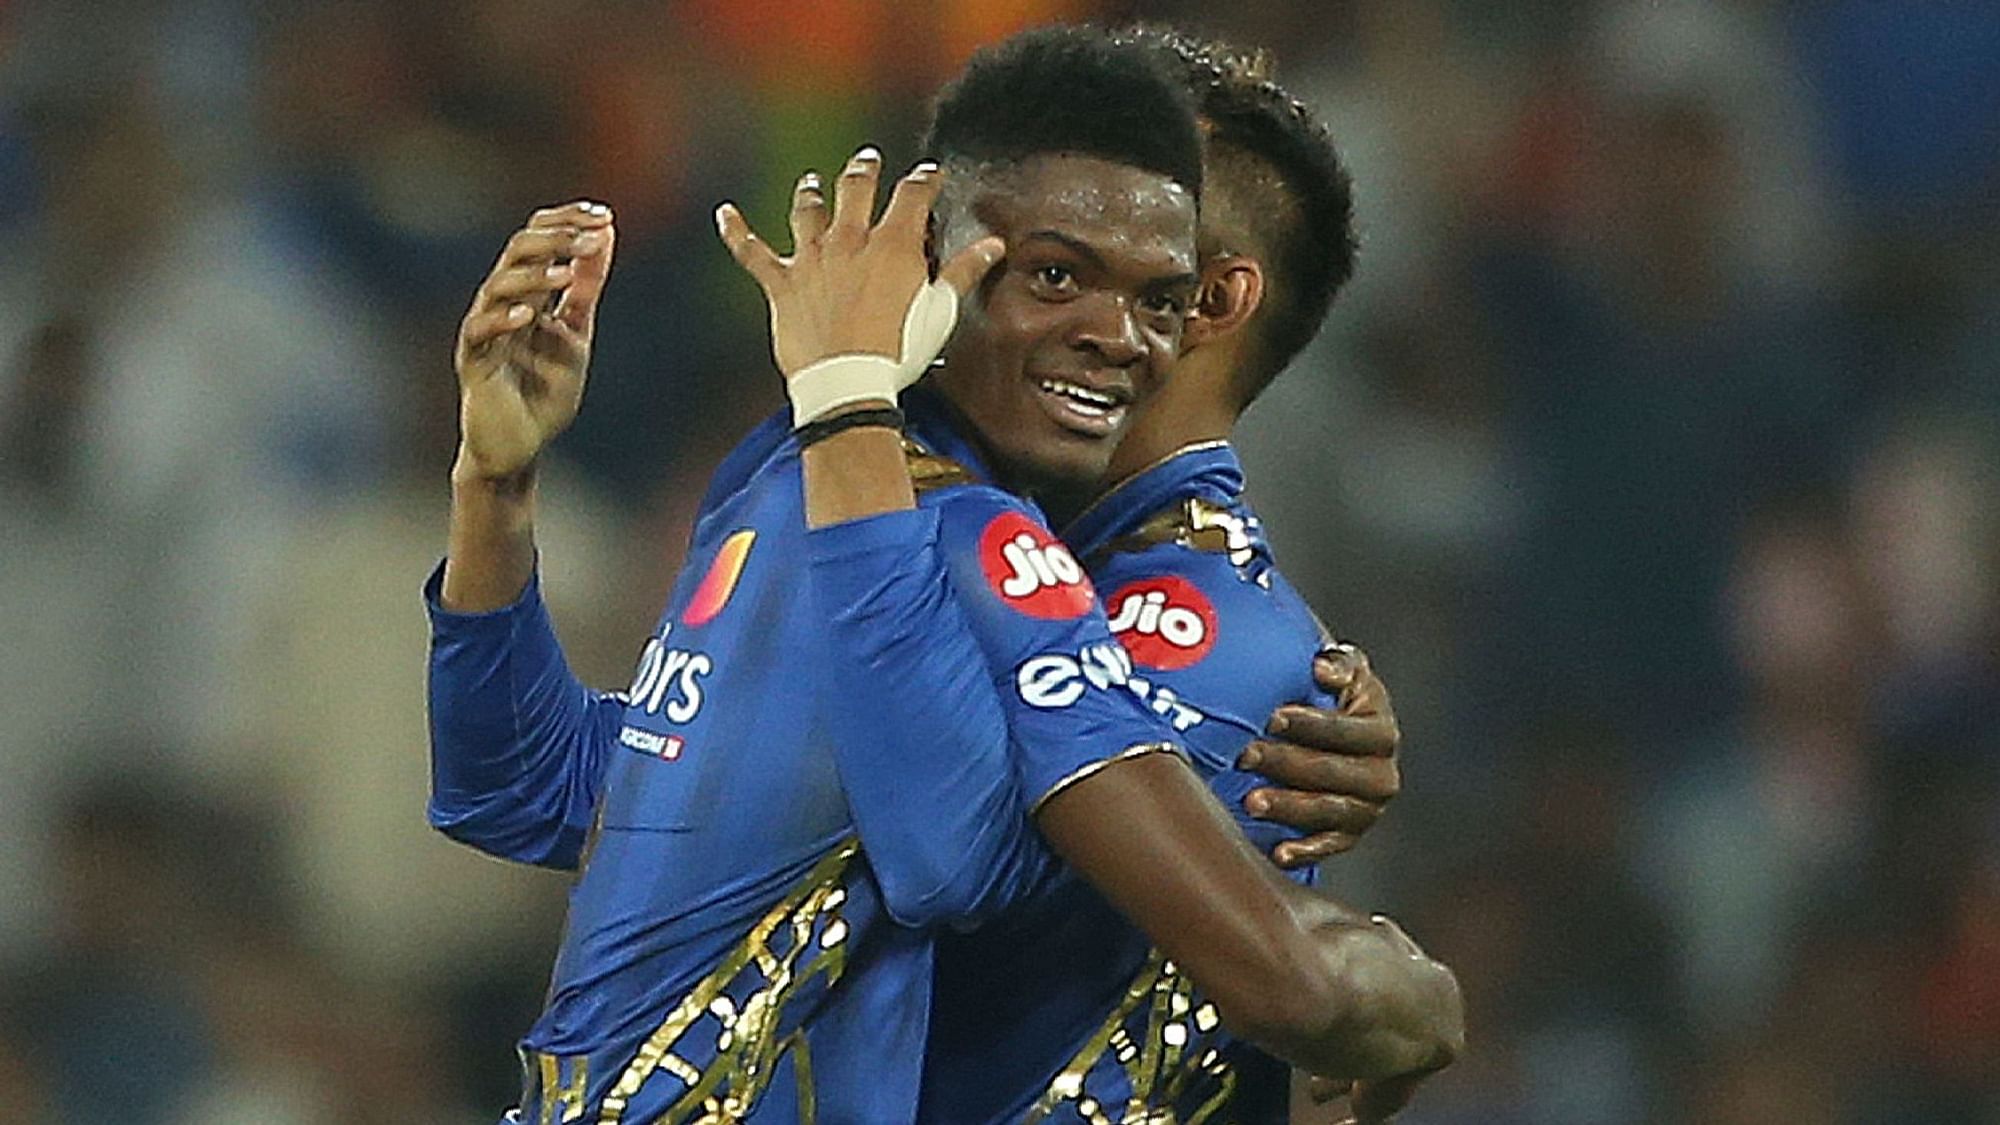 Mumbai Indian’s Alzarri Joseph celebrates for the six wickets of Sunrisers Hyderabad after winning in Hyderabad on Saturday, April 6.